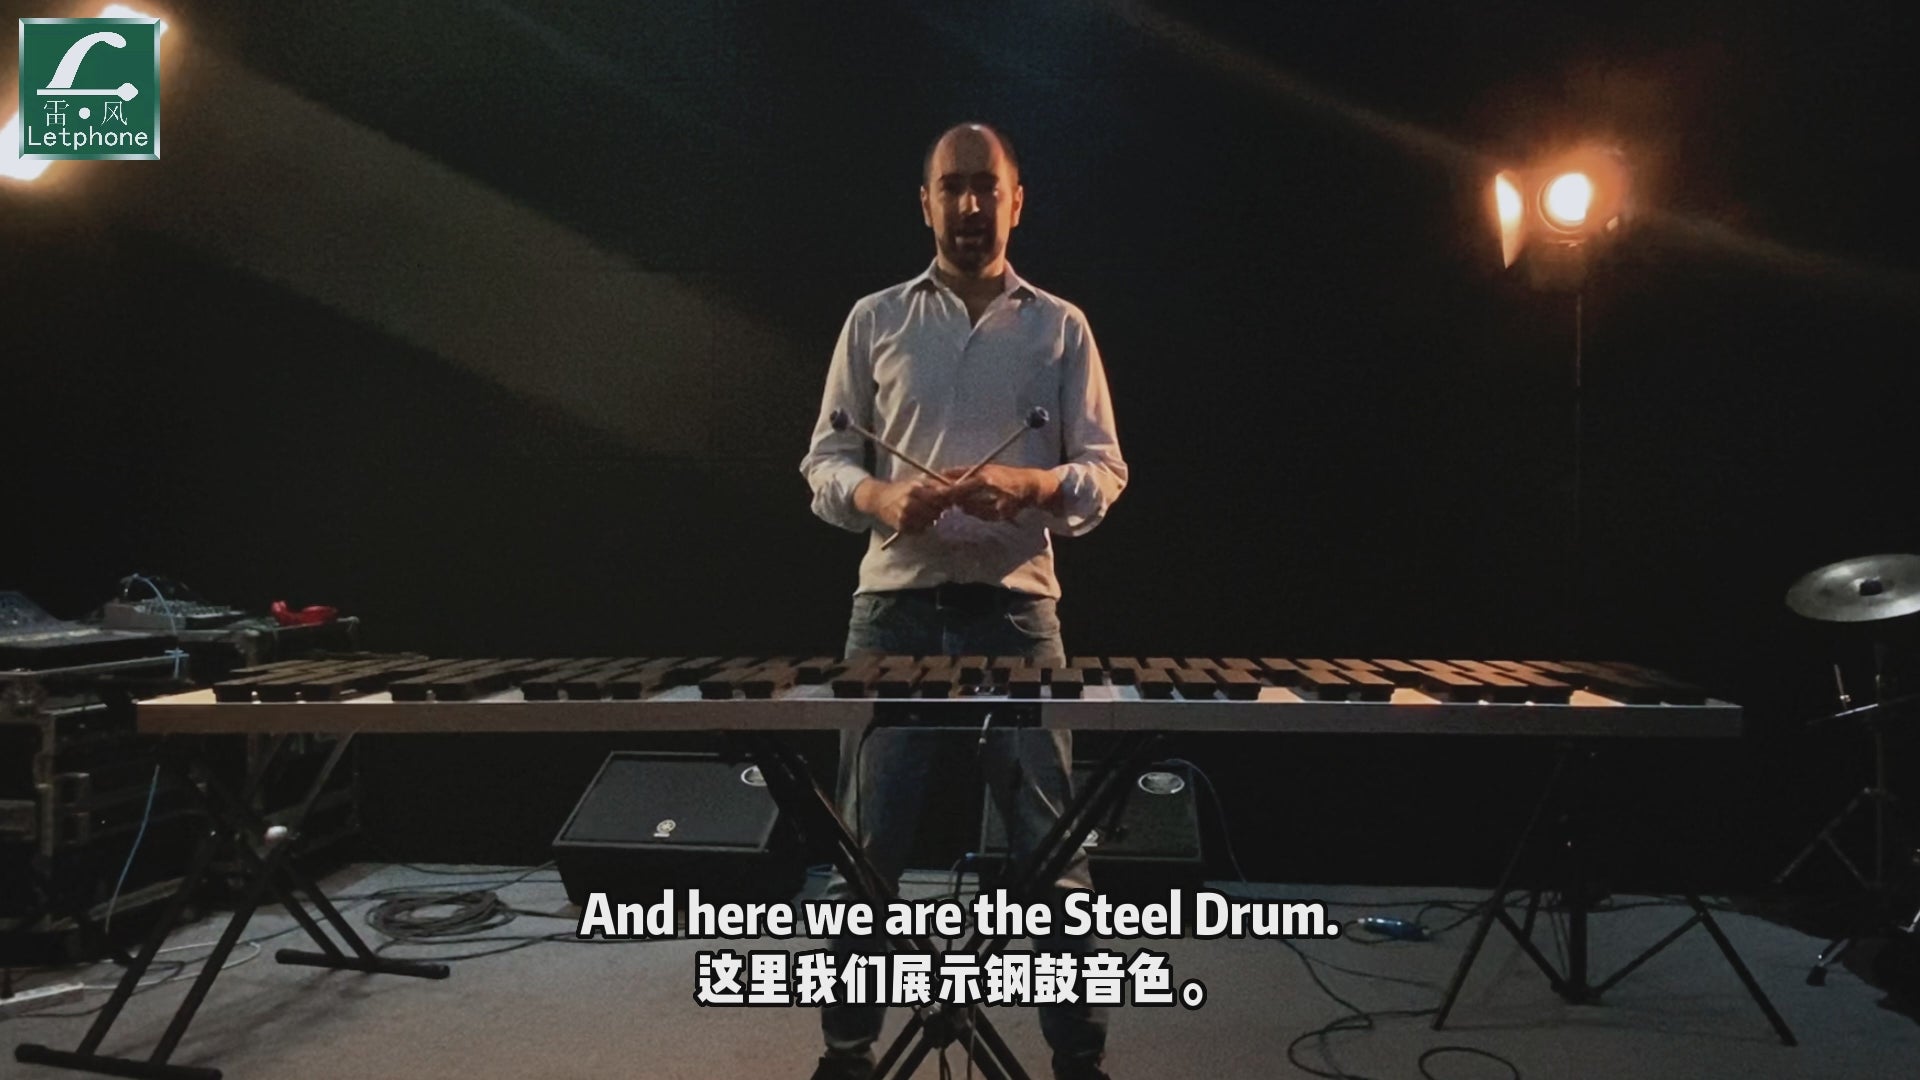 The timber of the steel drum.